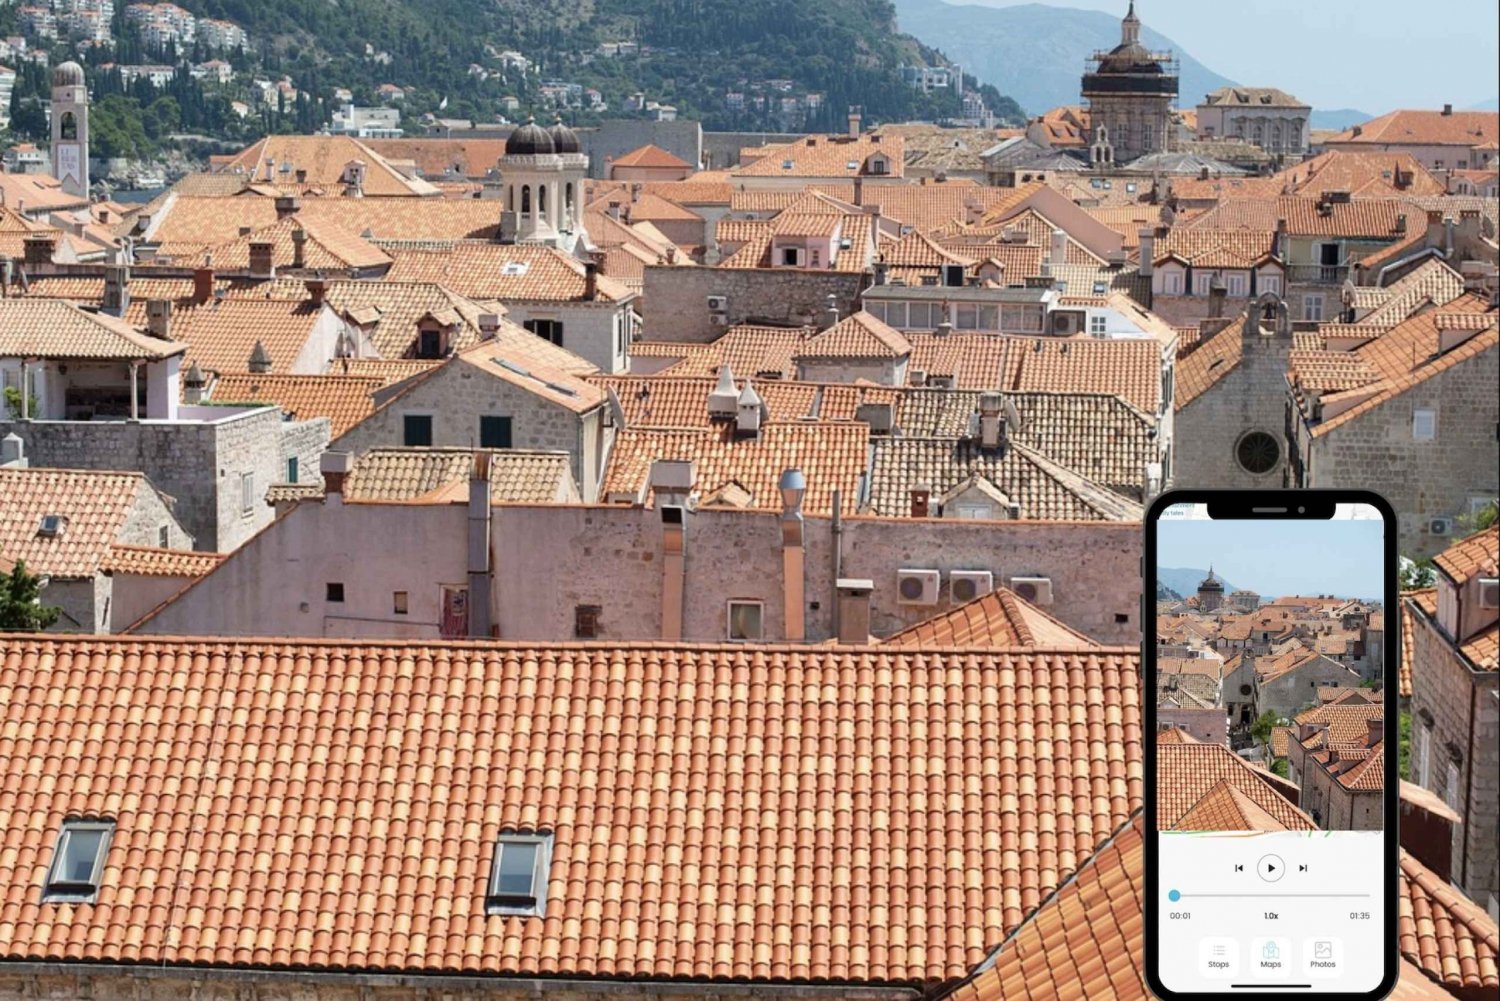 Dubrovnik: Game Of Thrones Self-guided tour with mobile app